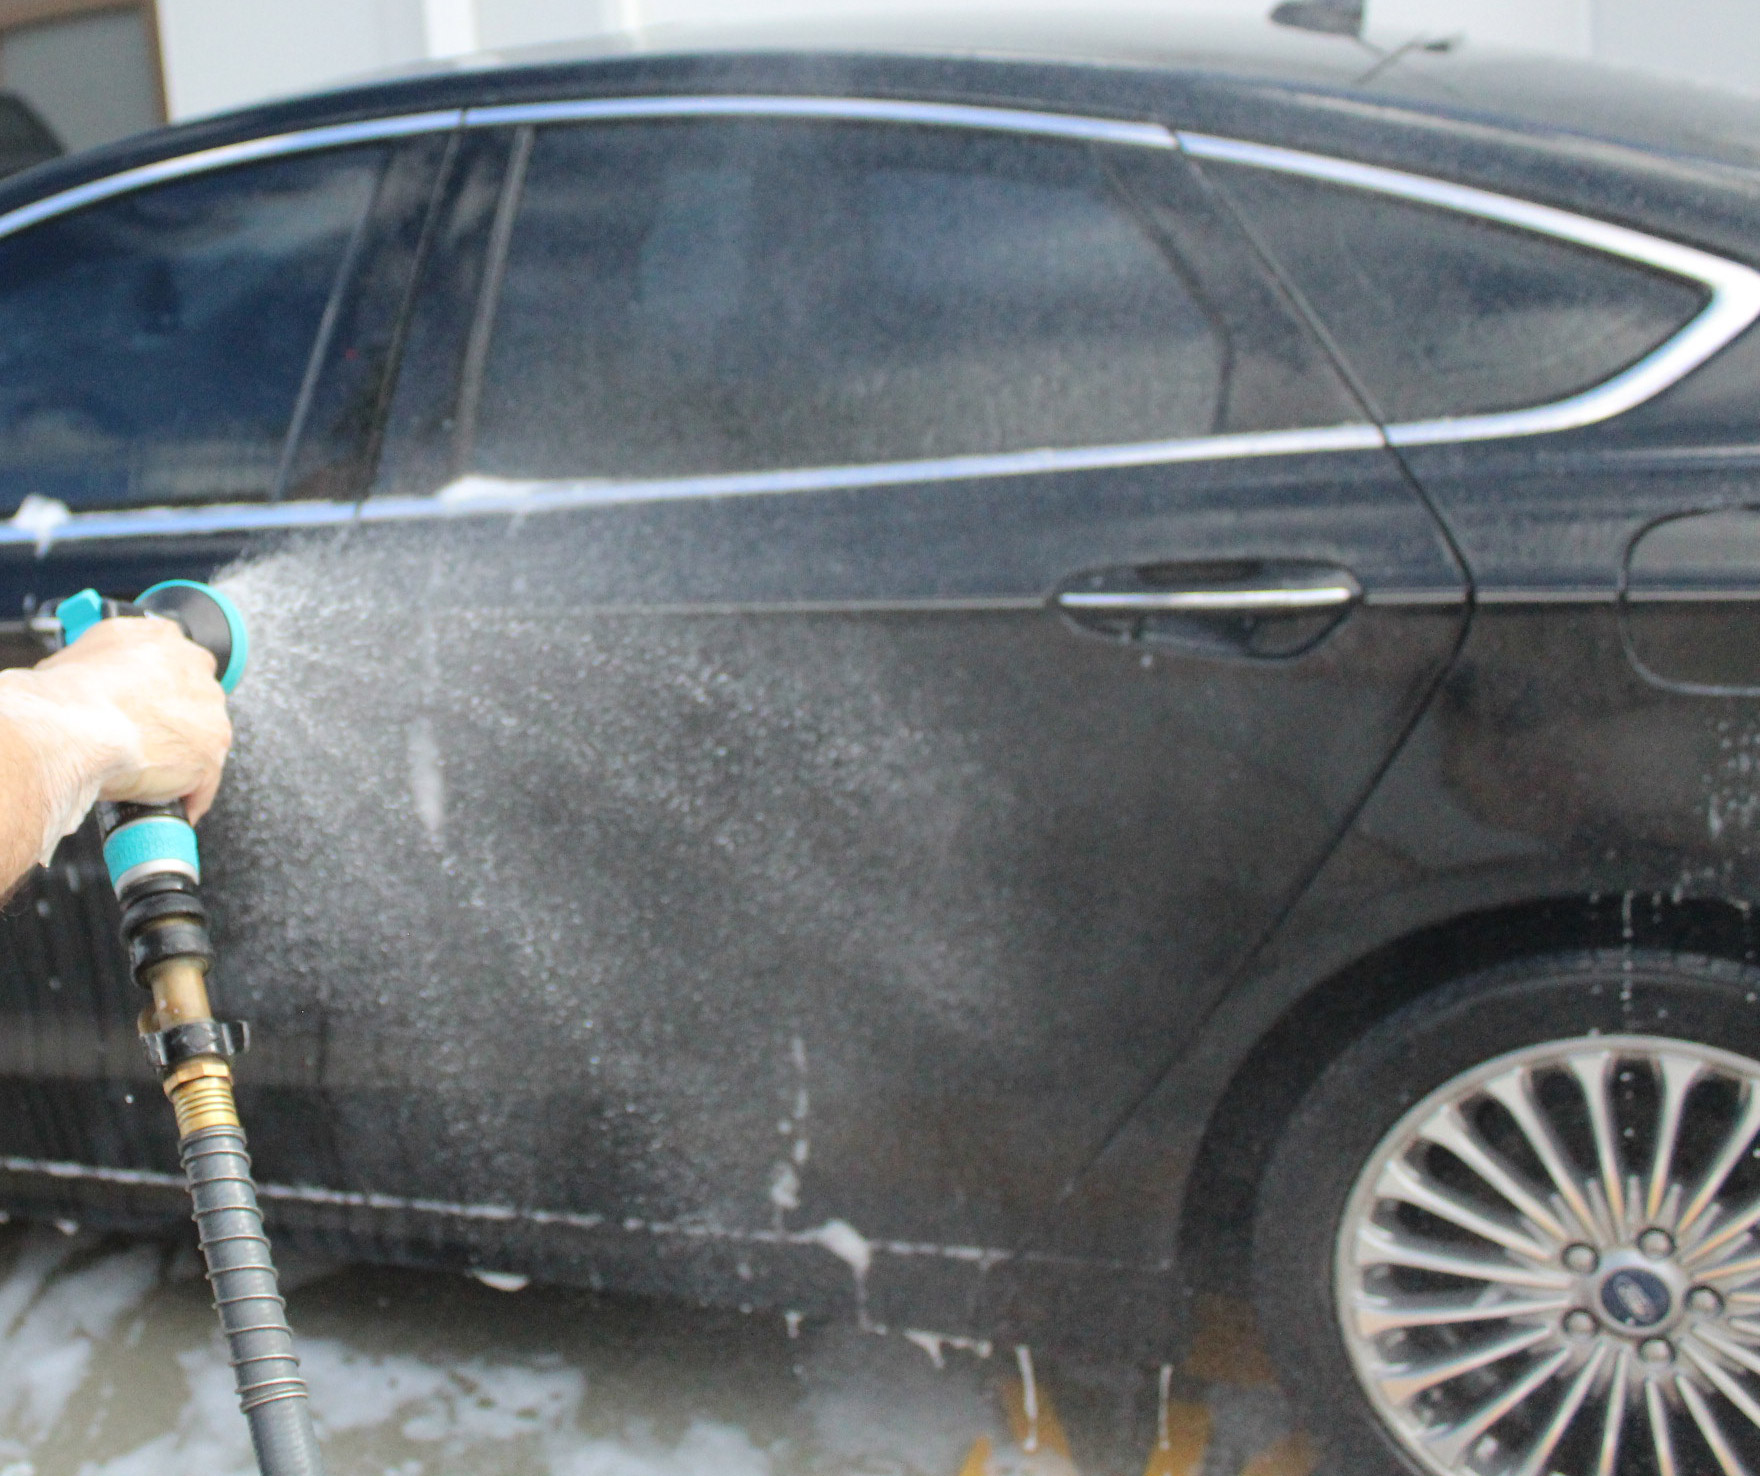 we will rinse off the entirety of the car and make sure there are no more suds or car shampoo on the surface.